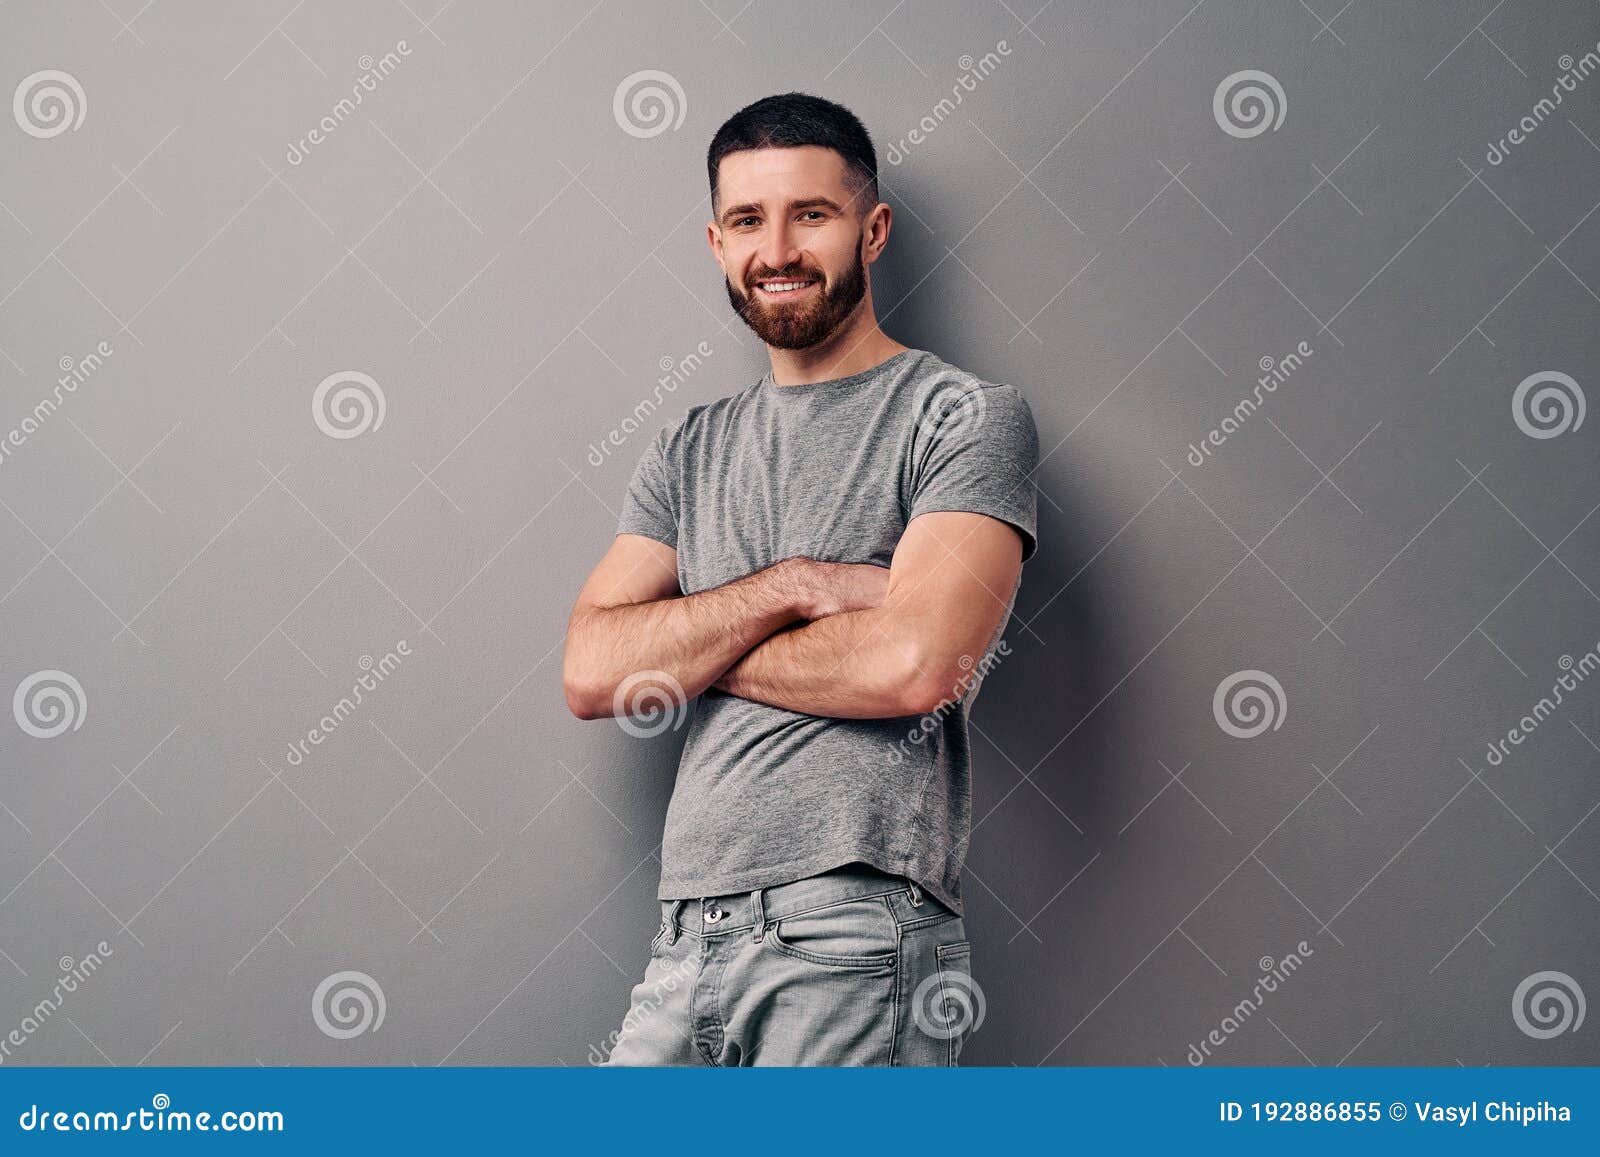 Portrait of a Handsome Young Man Who is Standing Leaning on a Gray Wall ...